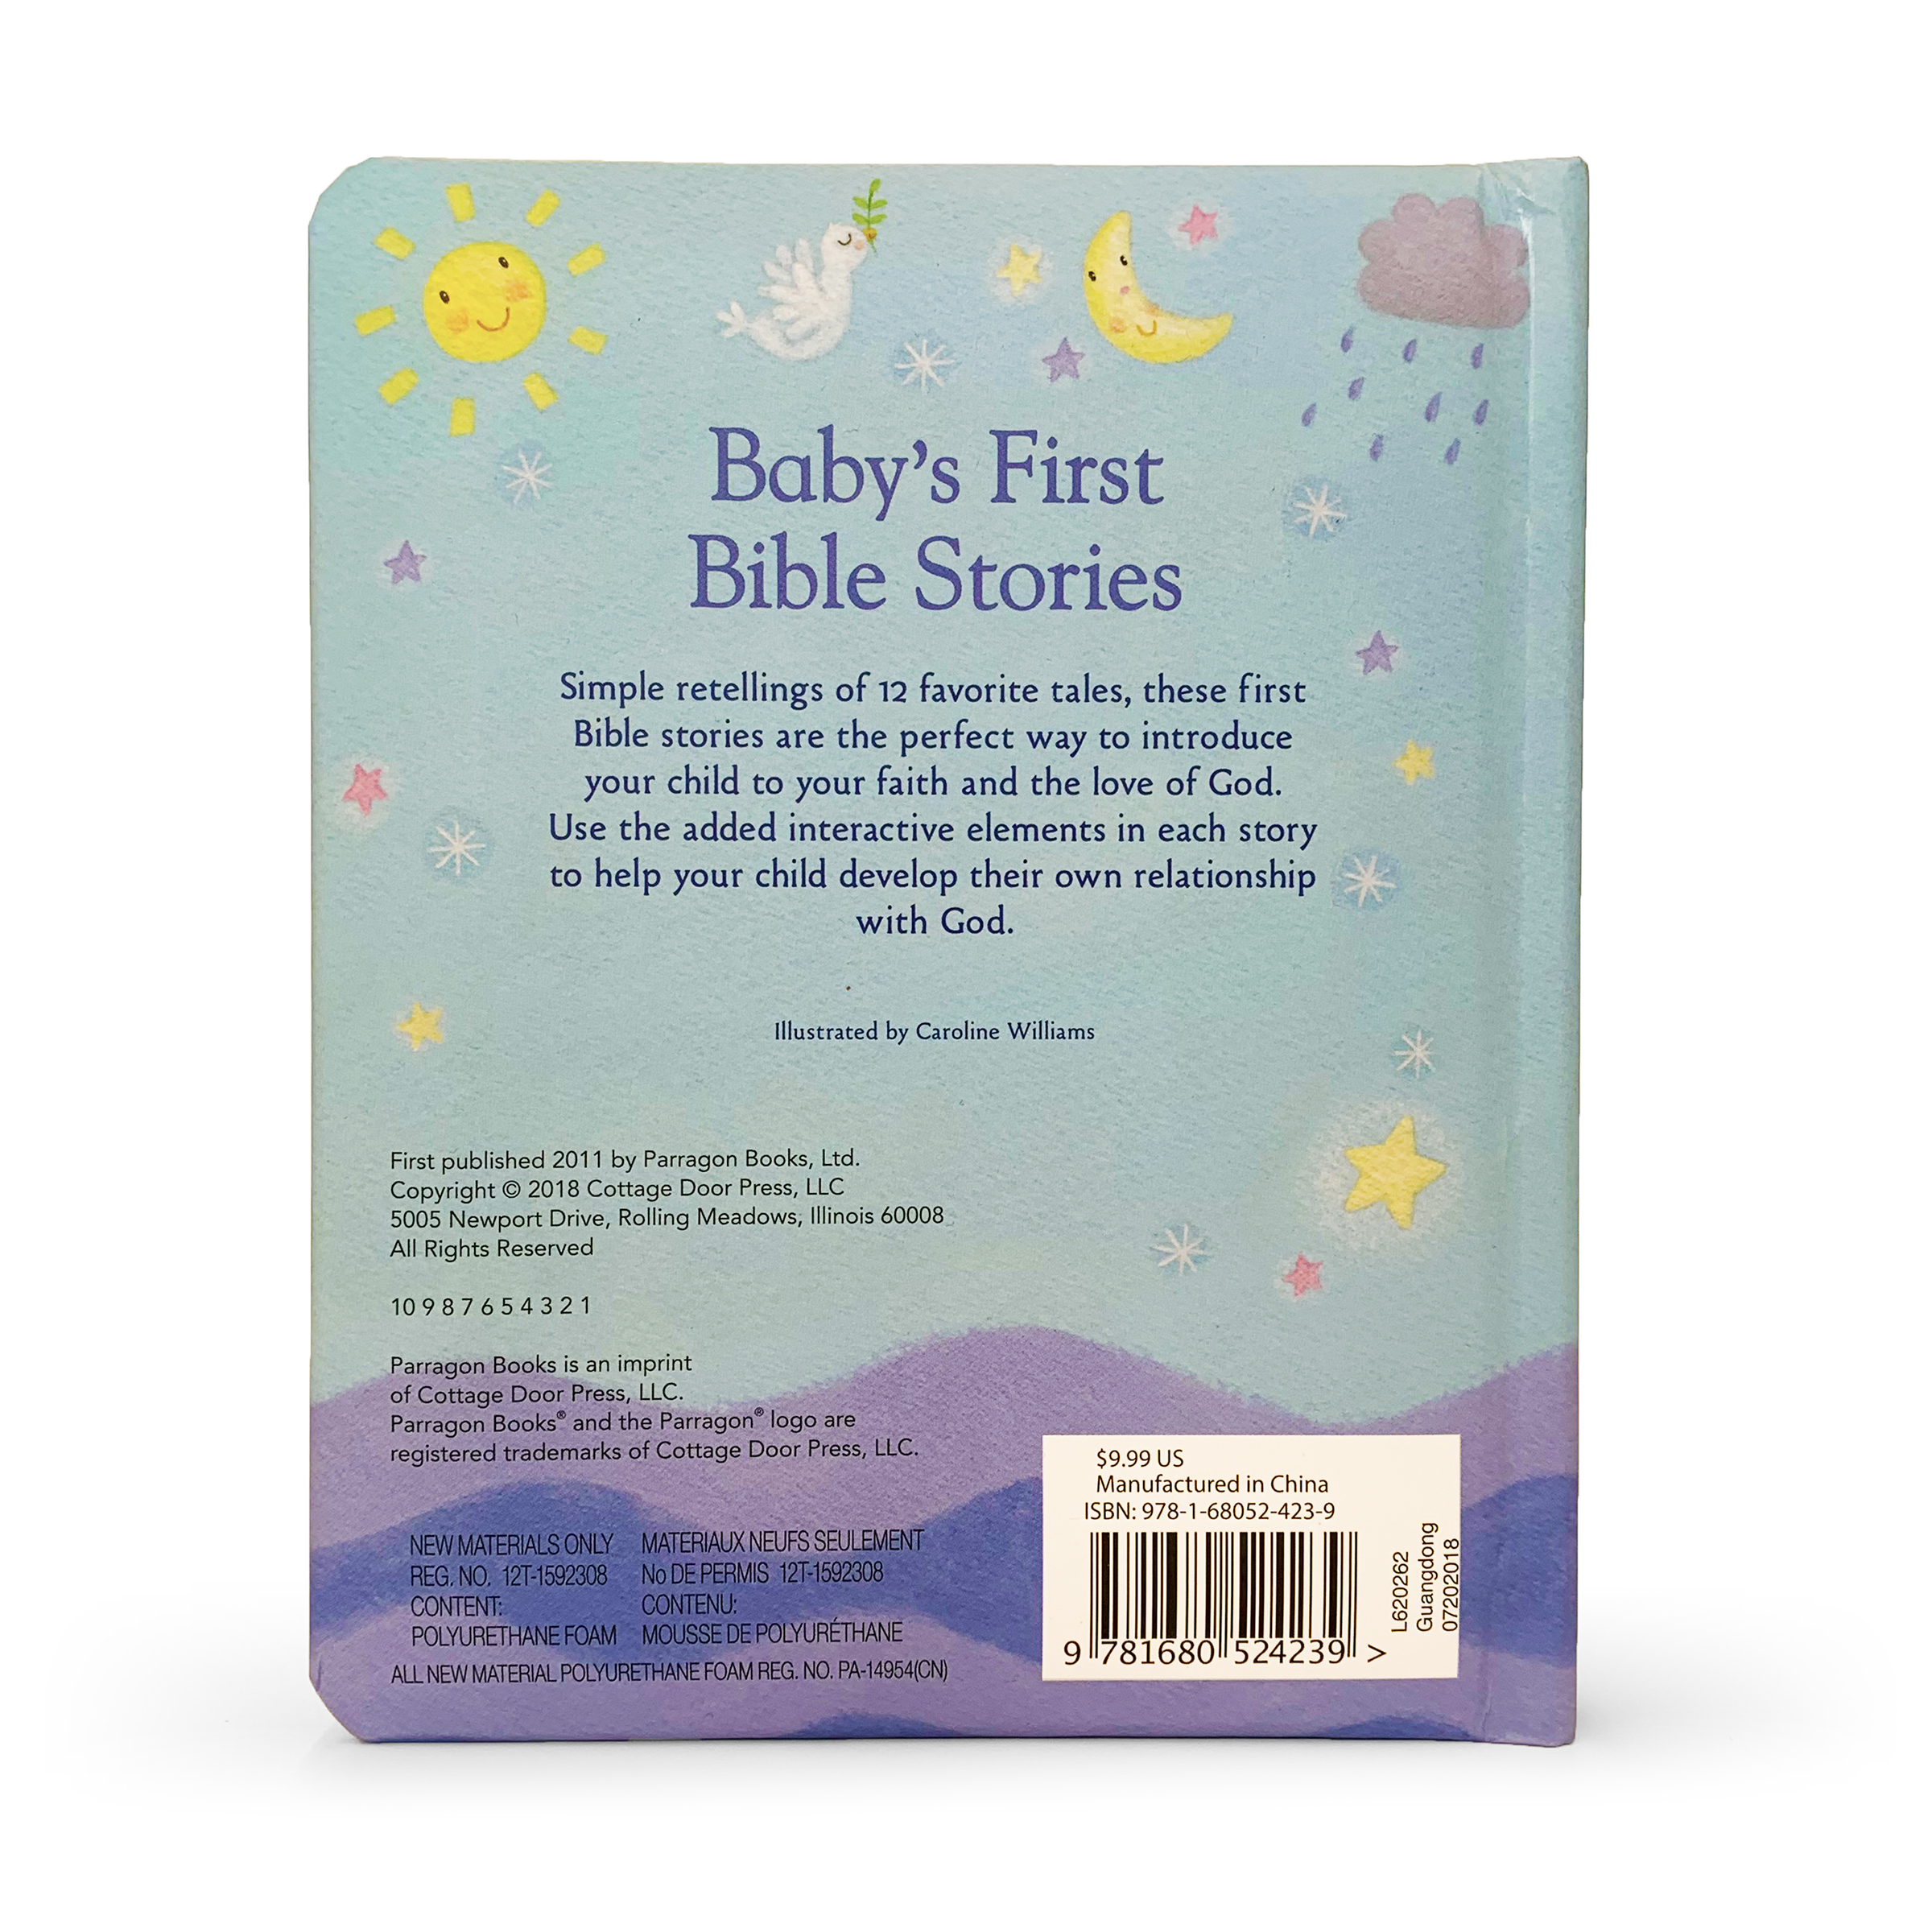 Baby's First Bible Stories